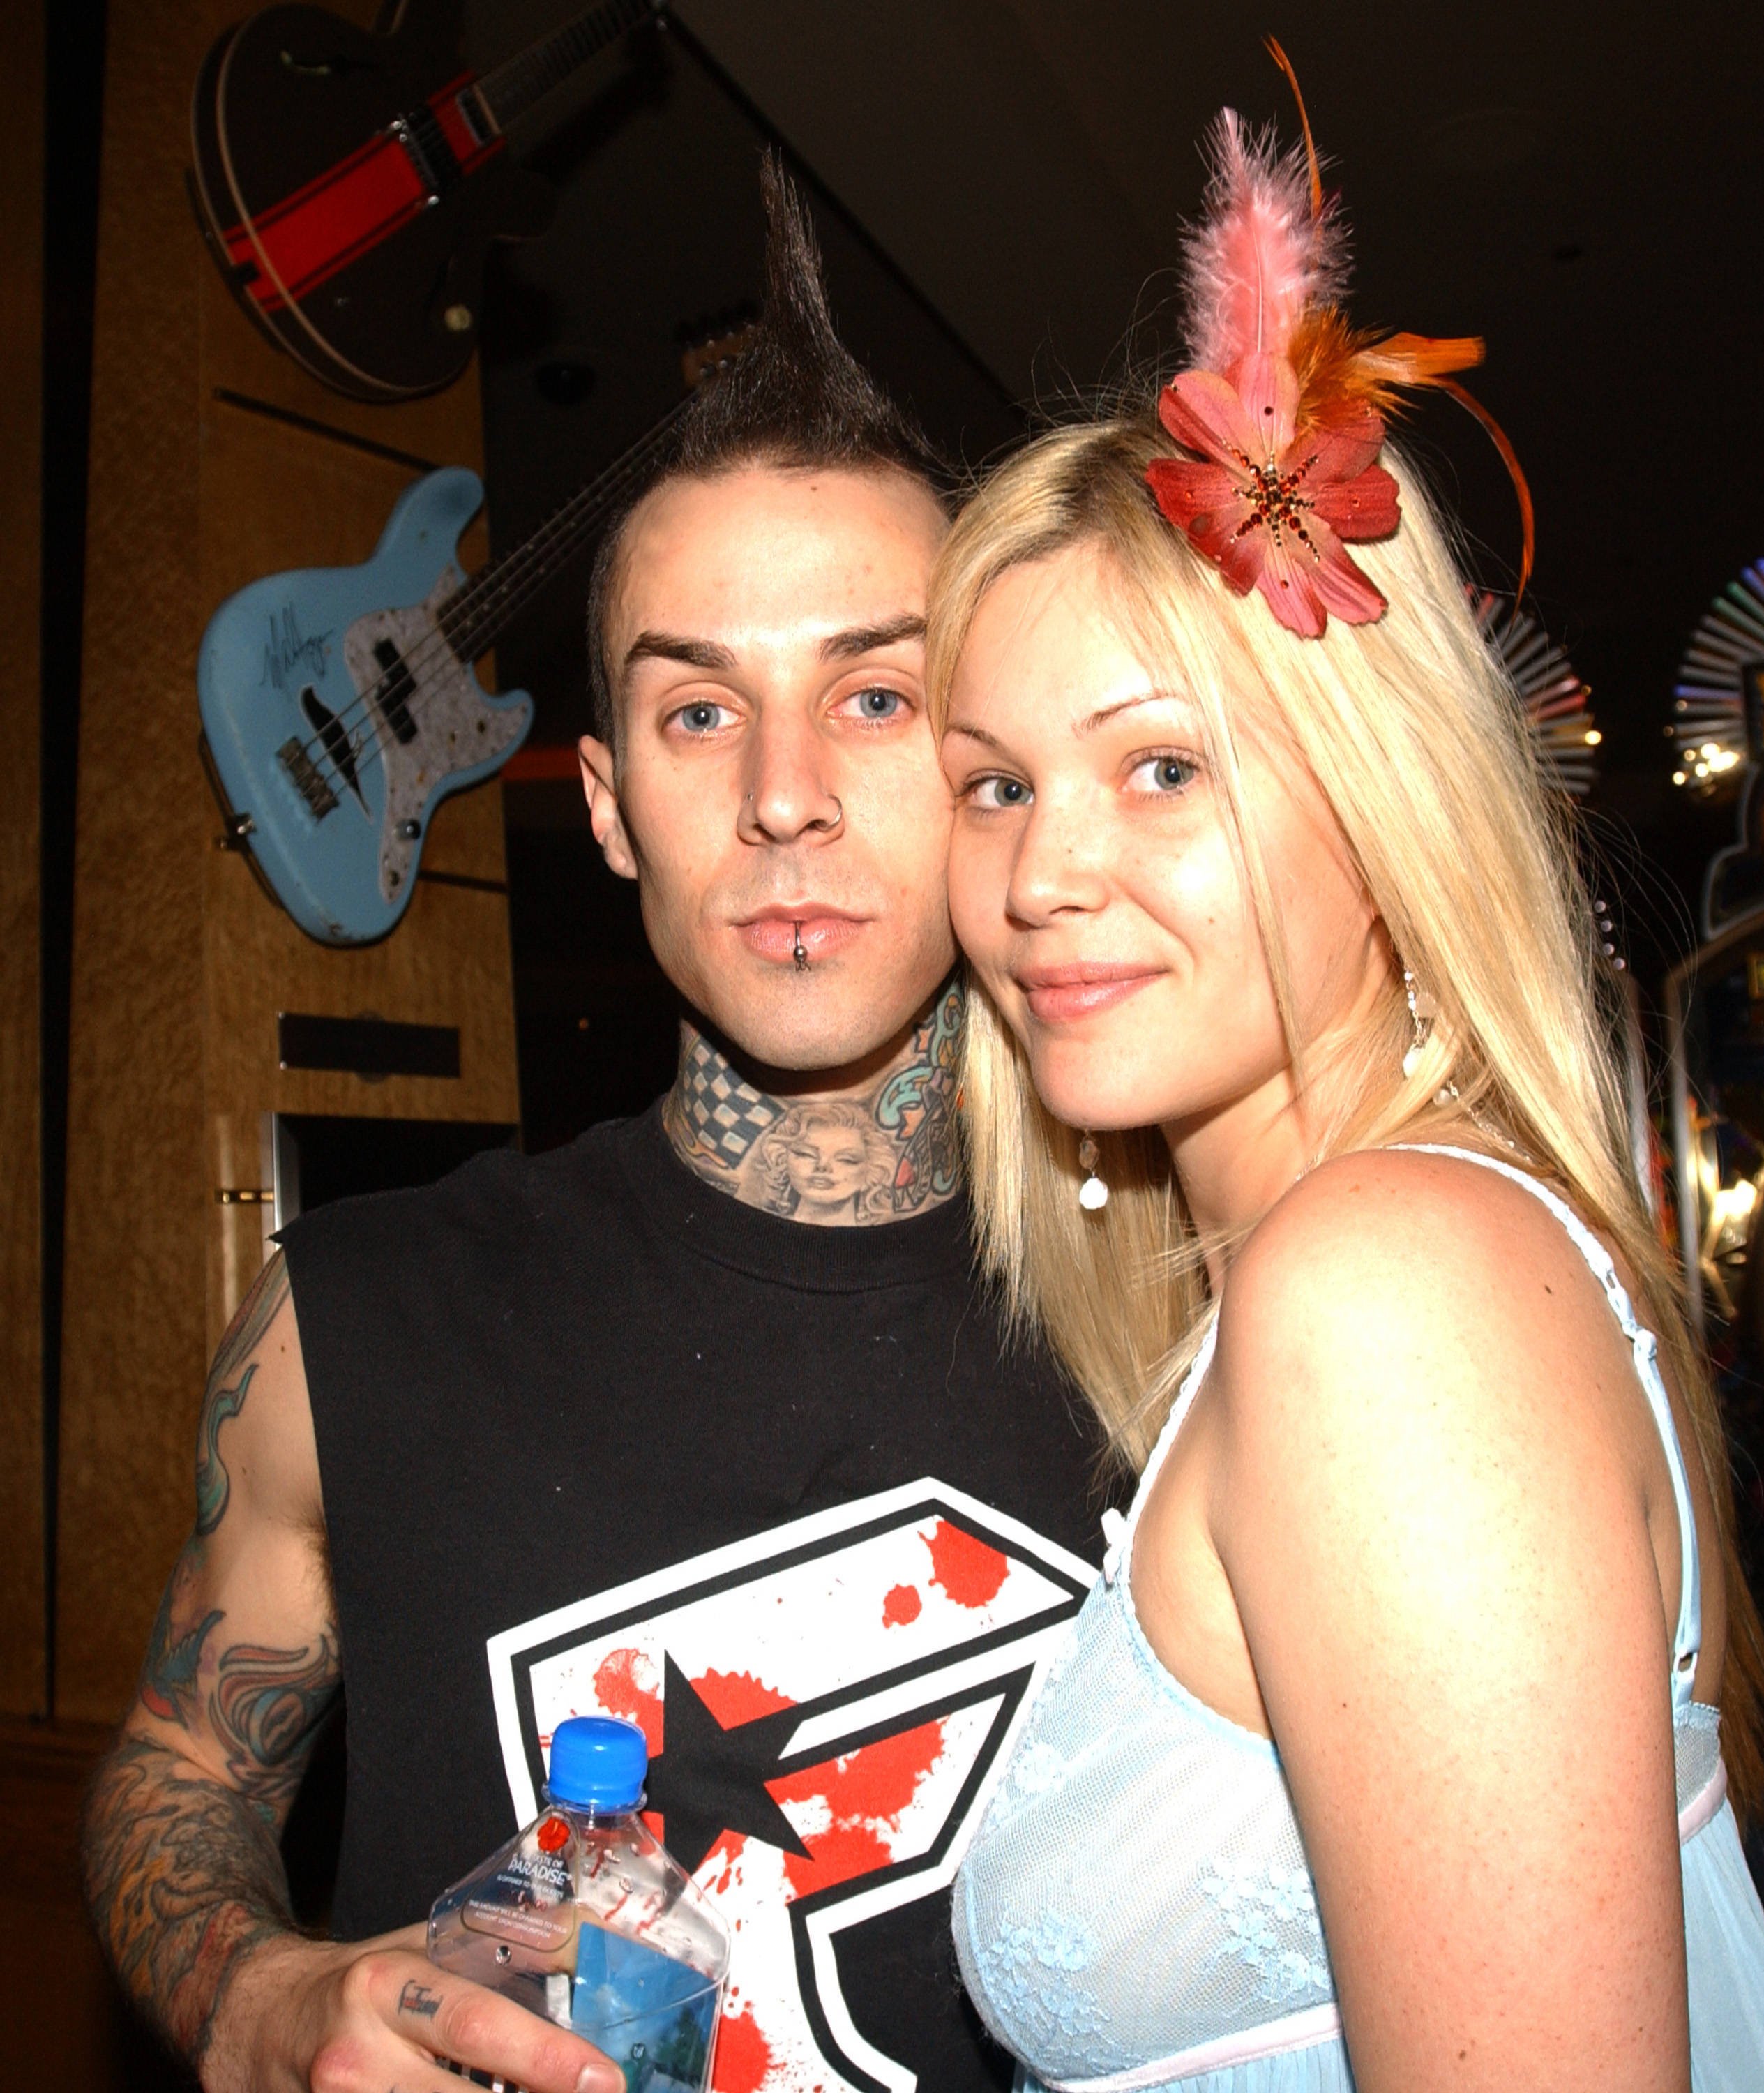 Travis, with spiked hair and tattoos, and Shanna with a feather accessory in her hair